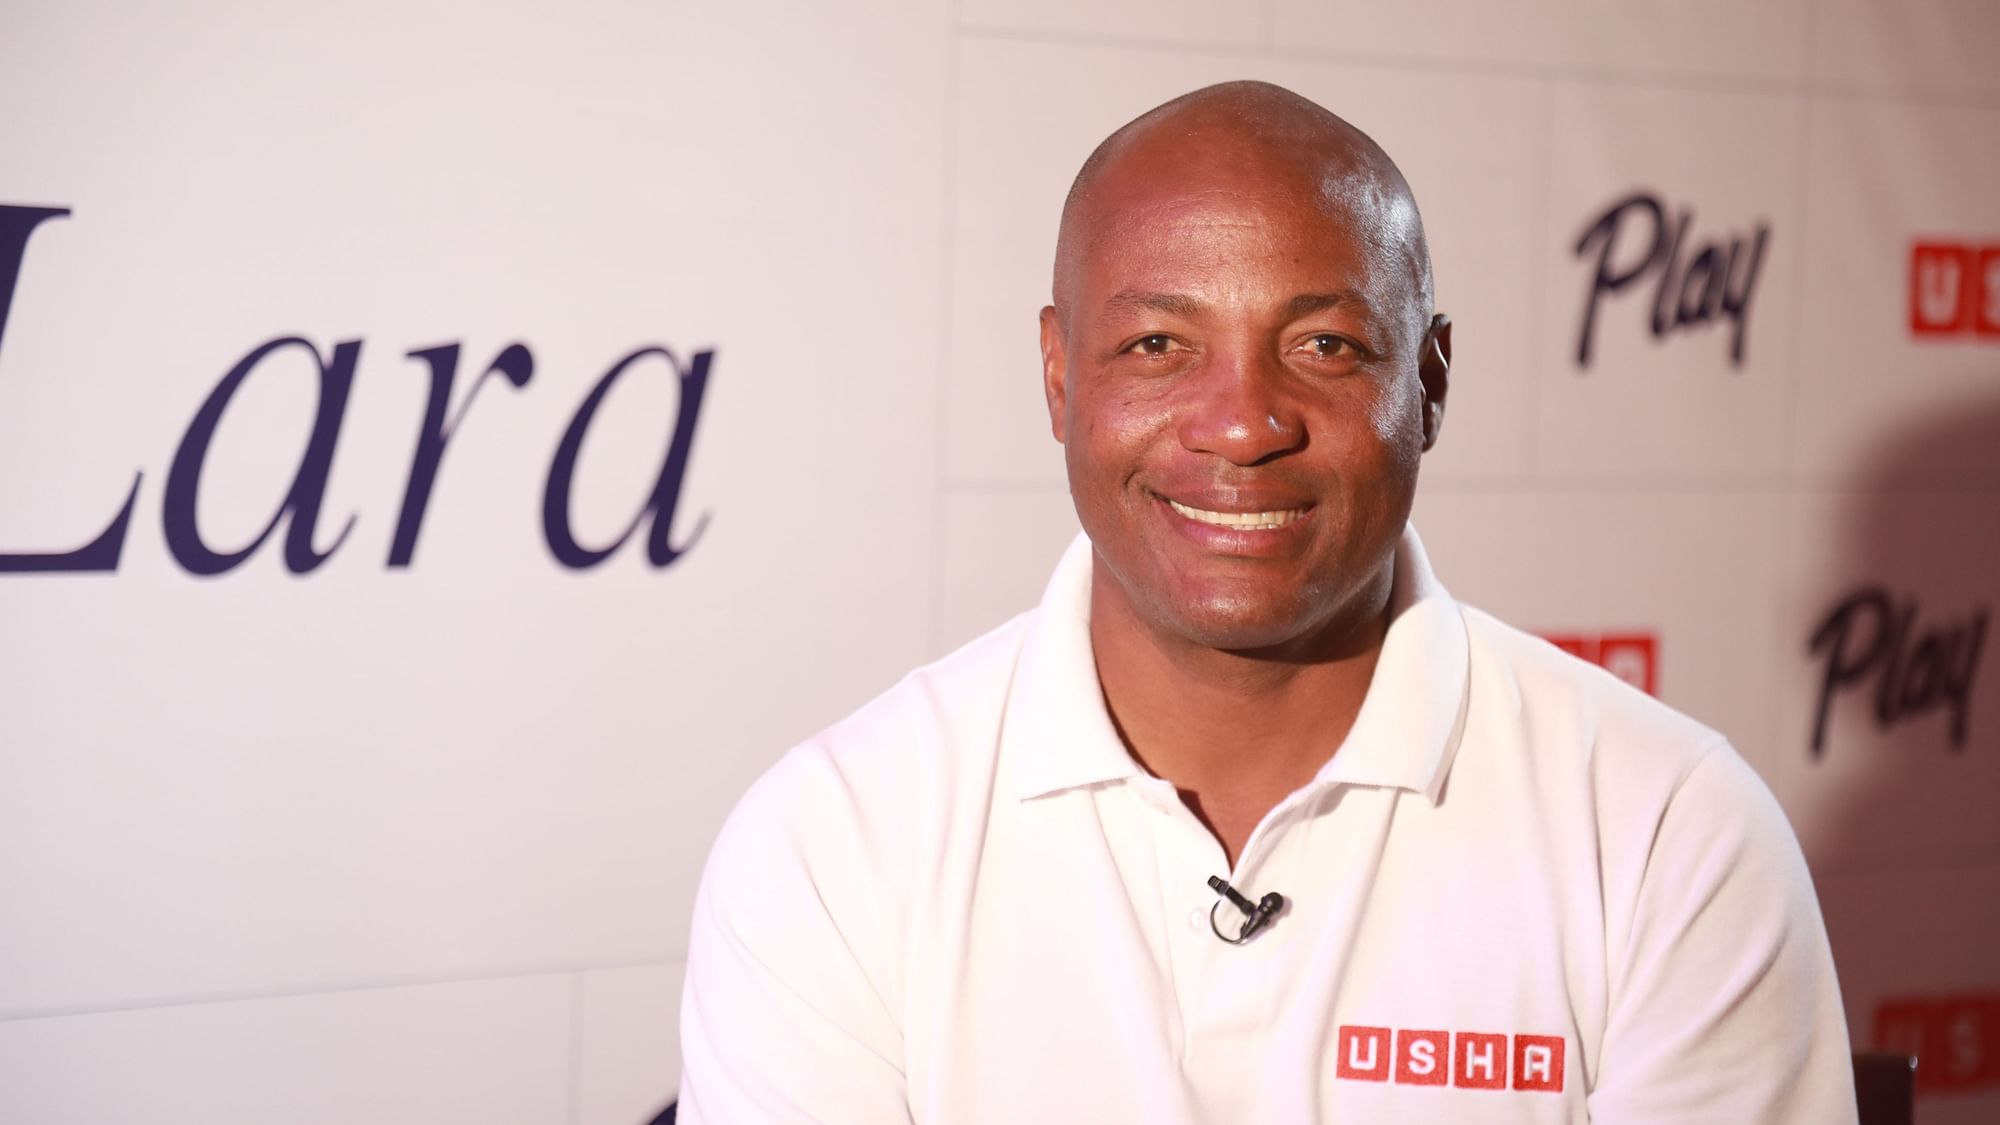 Former West Indies legend Brian Lara picked Steve Smith as the Cricketer of the Year for 2019.